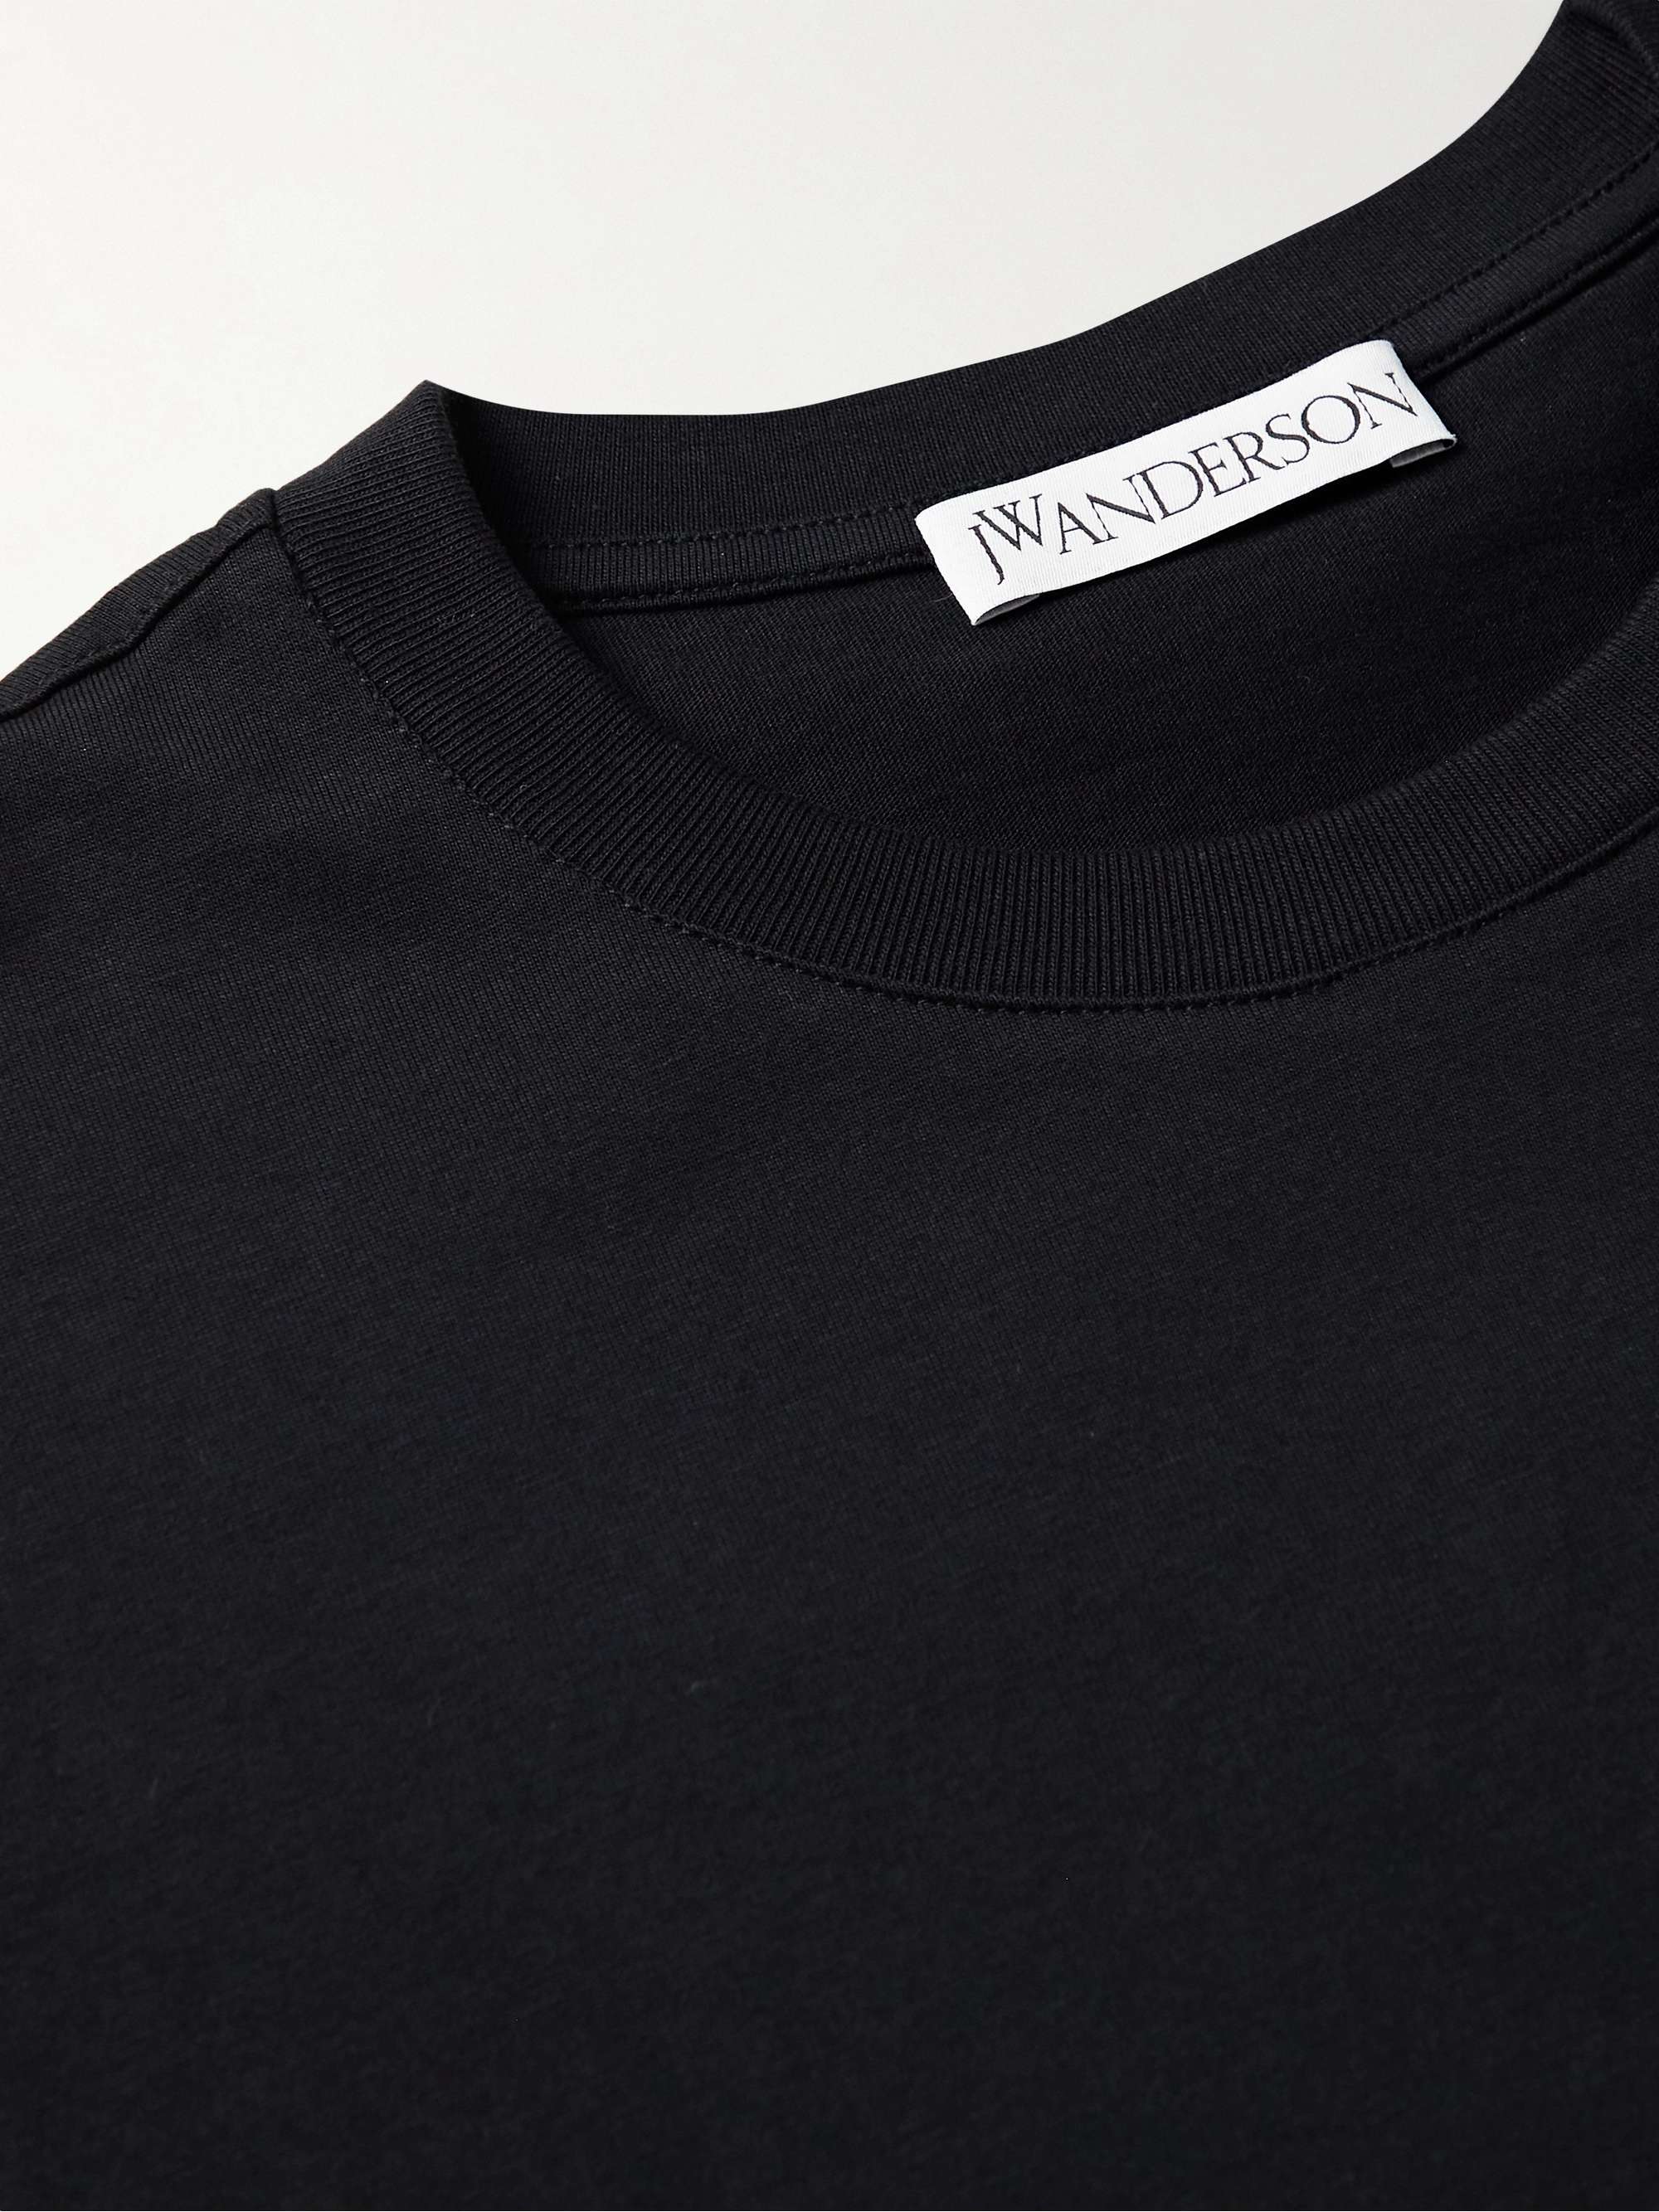 JW ANDERSON Embroidered Cotton-Jersey T-Shirt